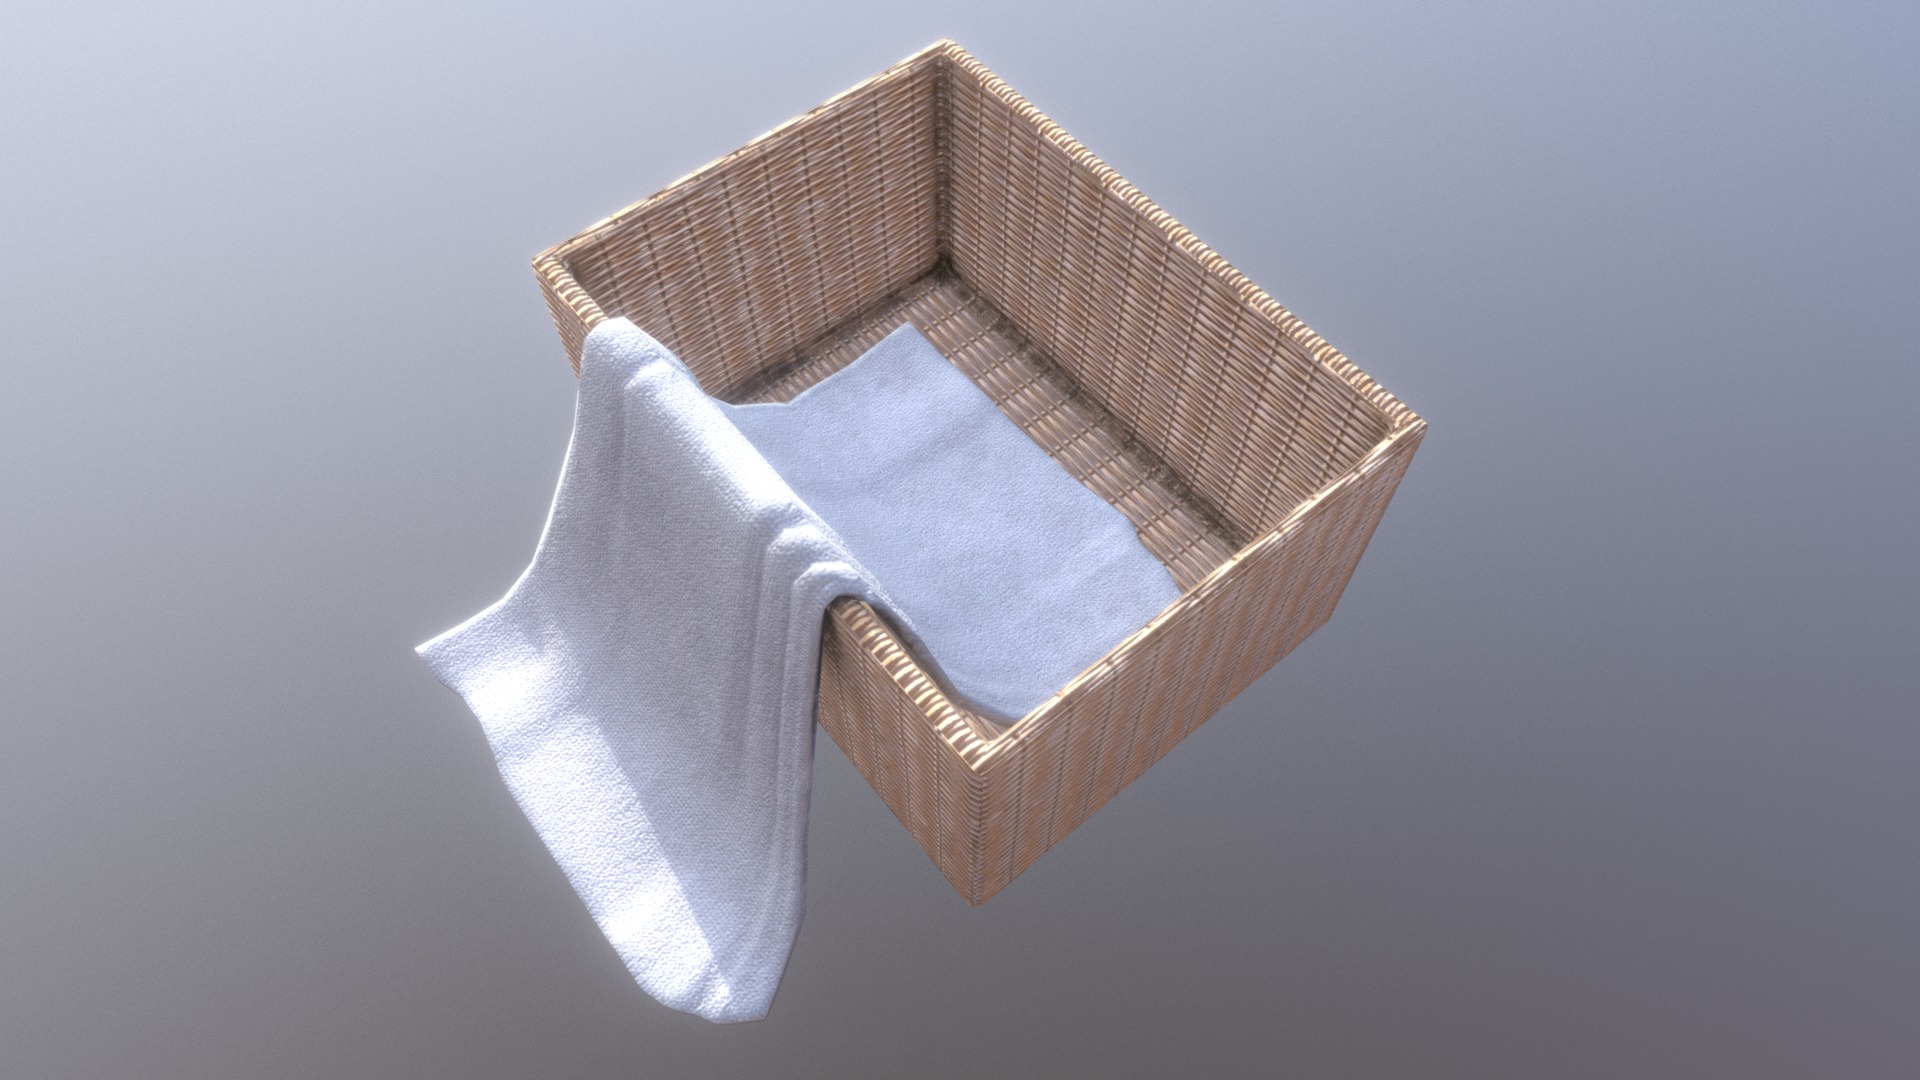 3D model Towel Basket - This is a 3D model of the Towel Basket. The 3D model is about a wooden box with a white background.